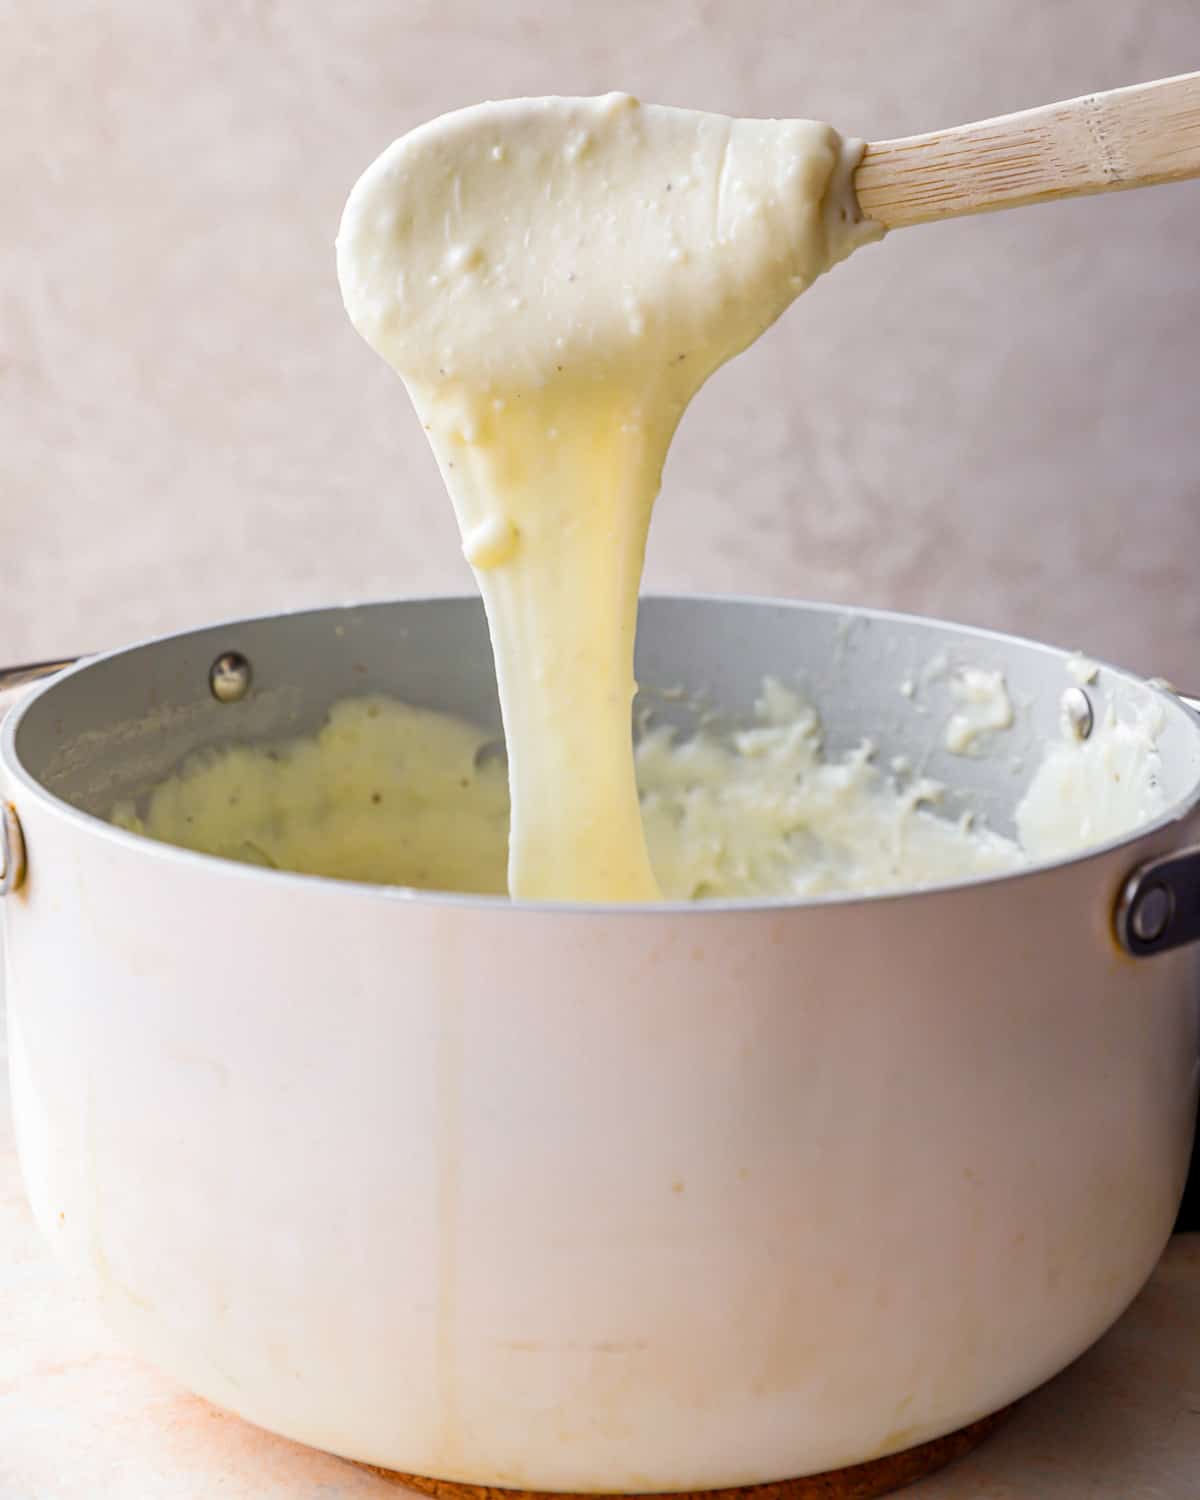 Wooden spoon pulling cheesy fondue mashed potatoes out of a pot.